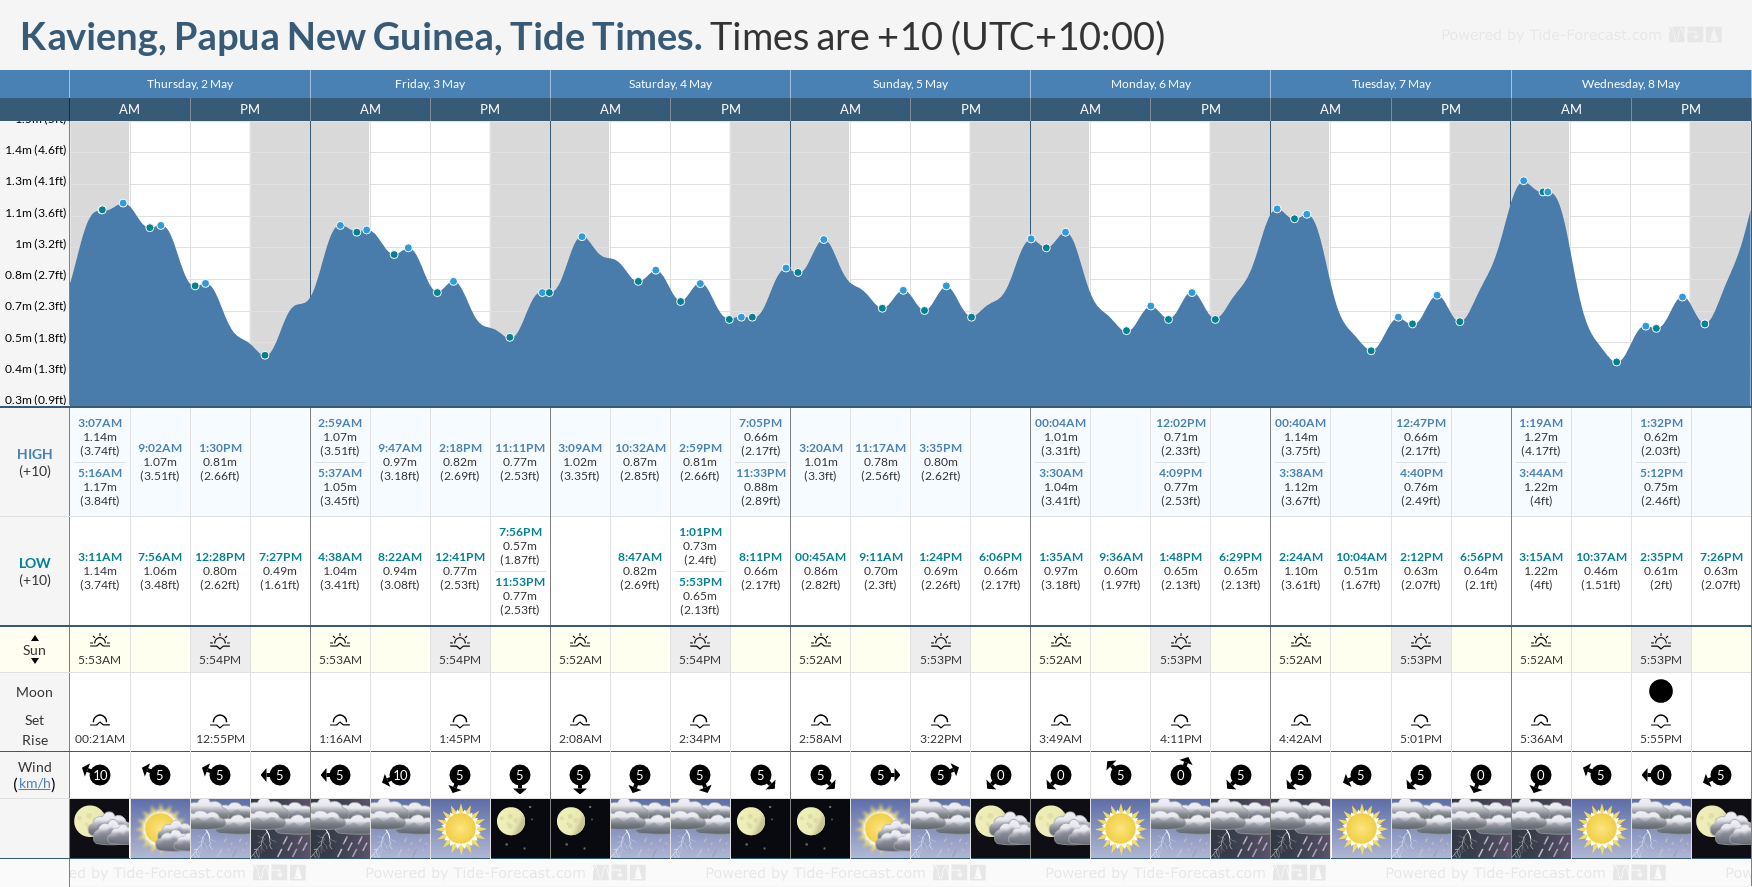 Kavieng, Papua New Guinea Tide Chart including high and low tide tide times for the next 7 days